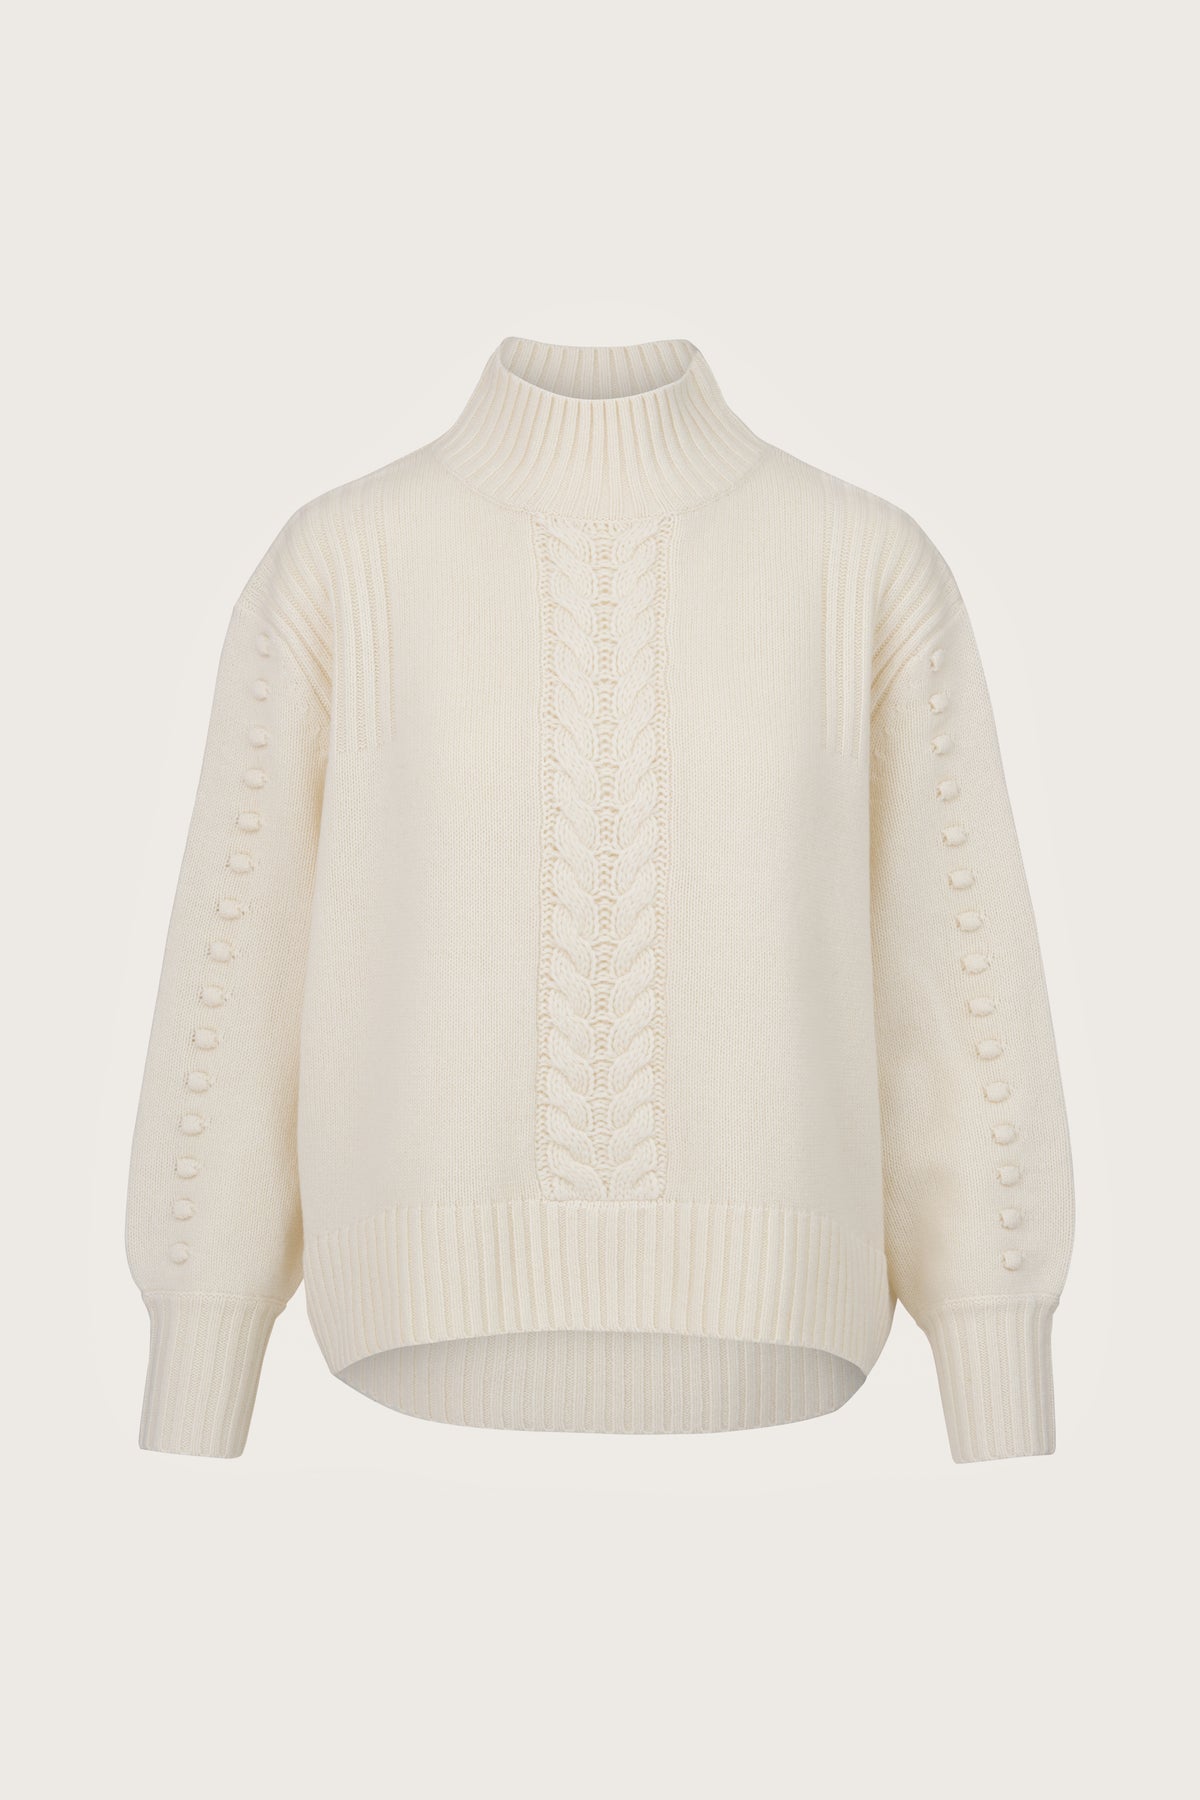 Woollen turtleneck jumper with cable knit detail and small knitted bobbles running down the sleeves